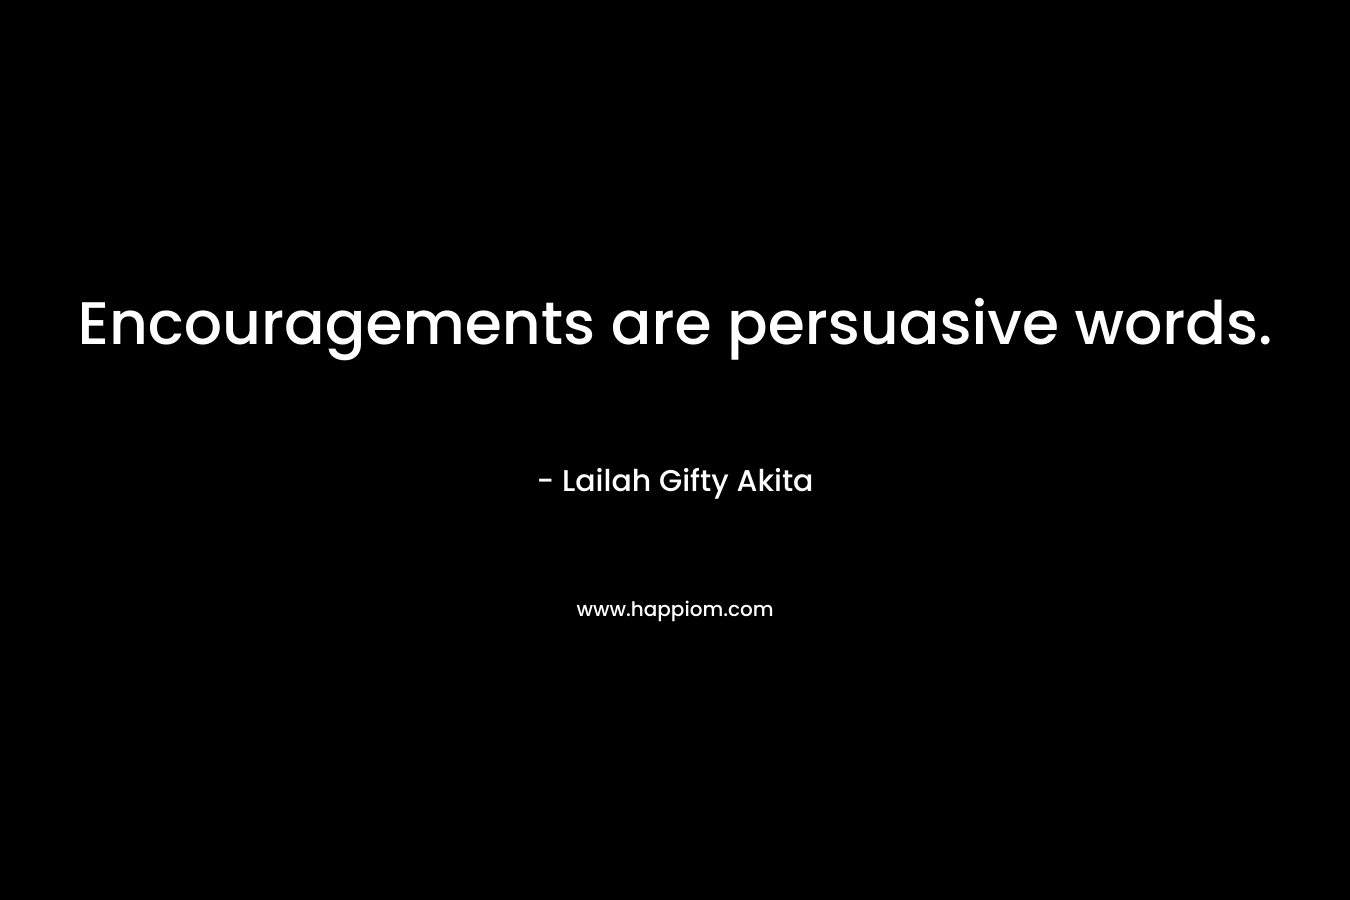 Encouragements are persuasive words. – Lailah Gifty Akita